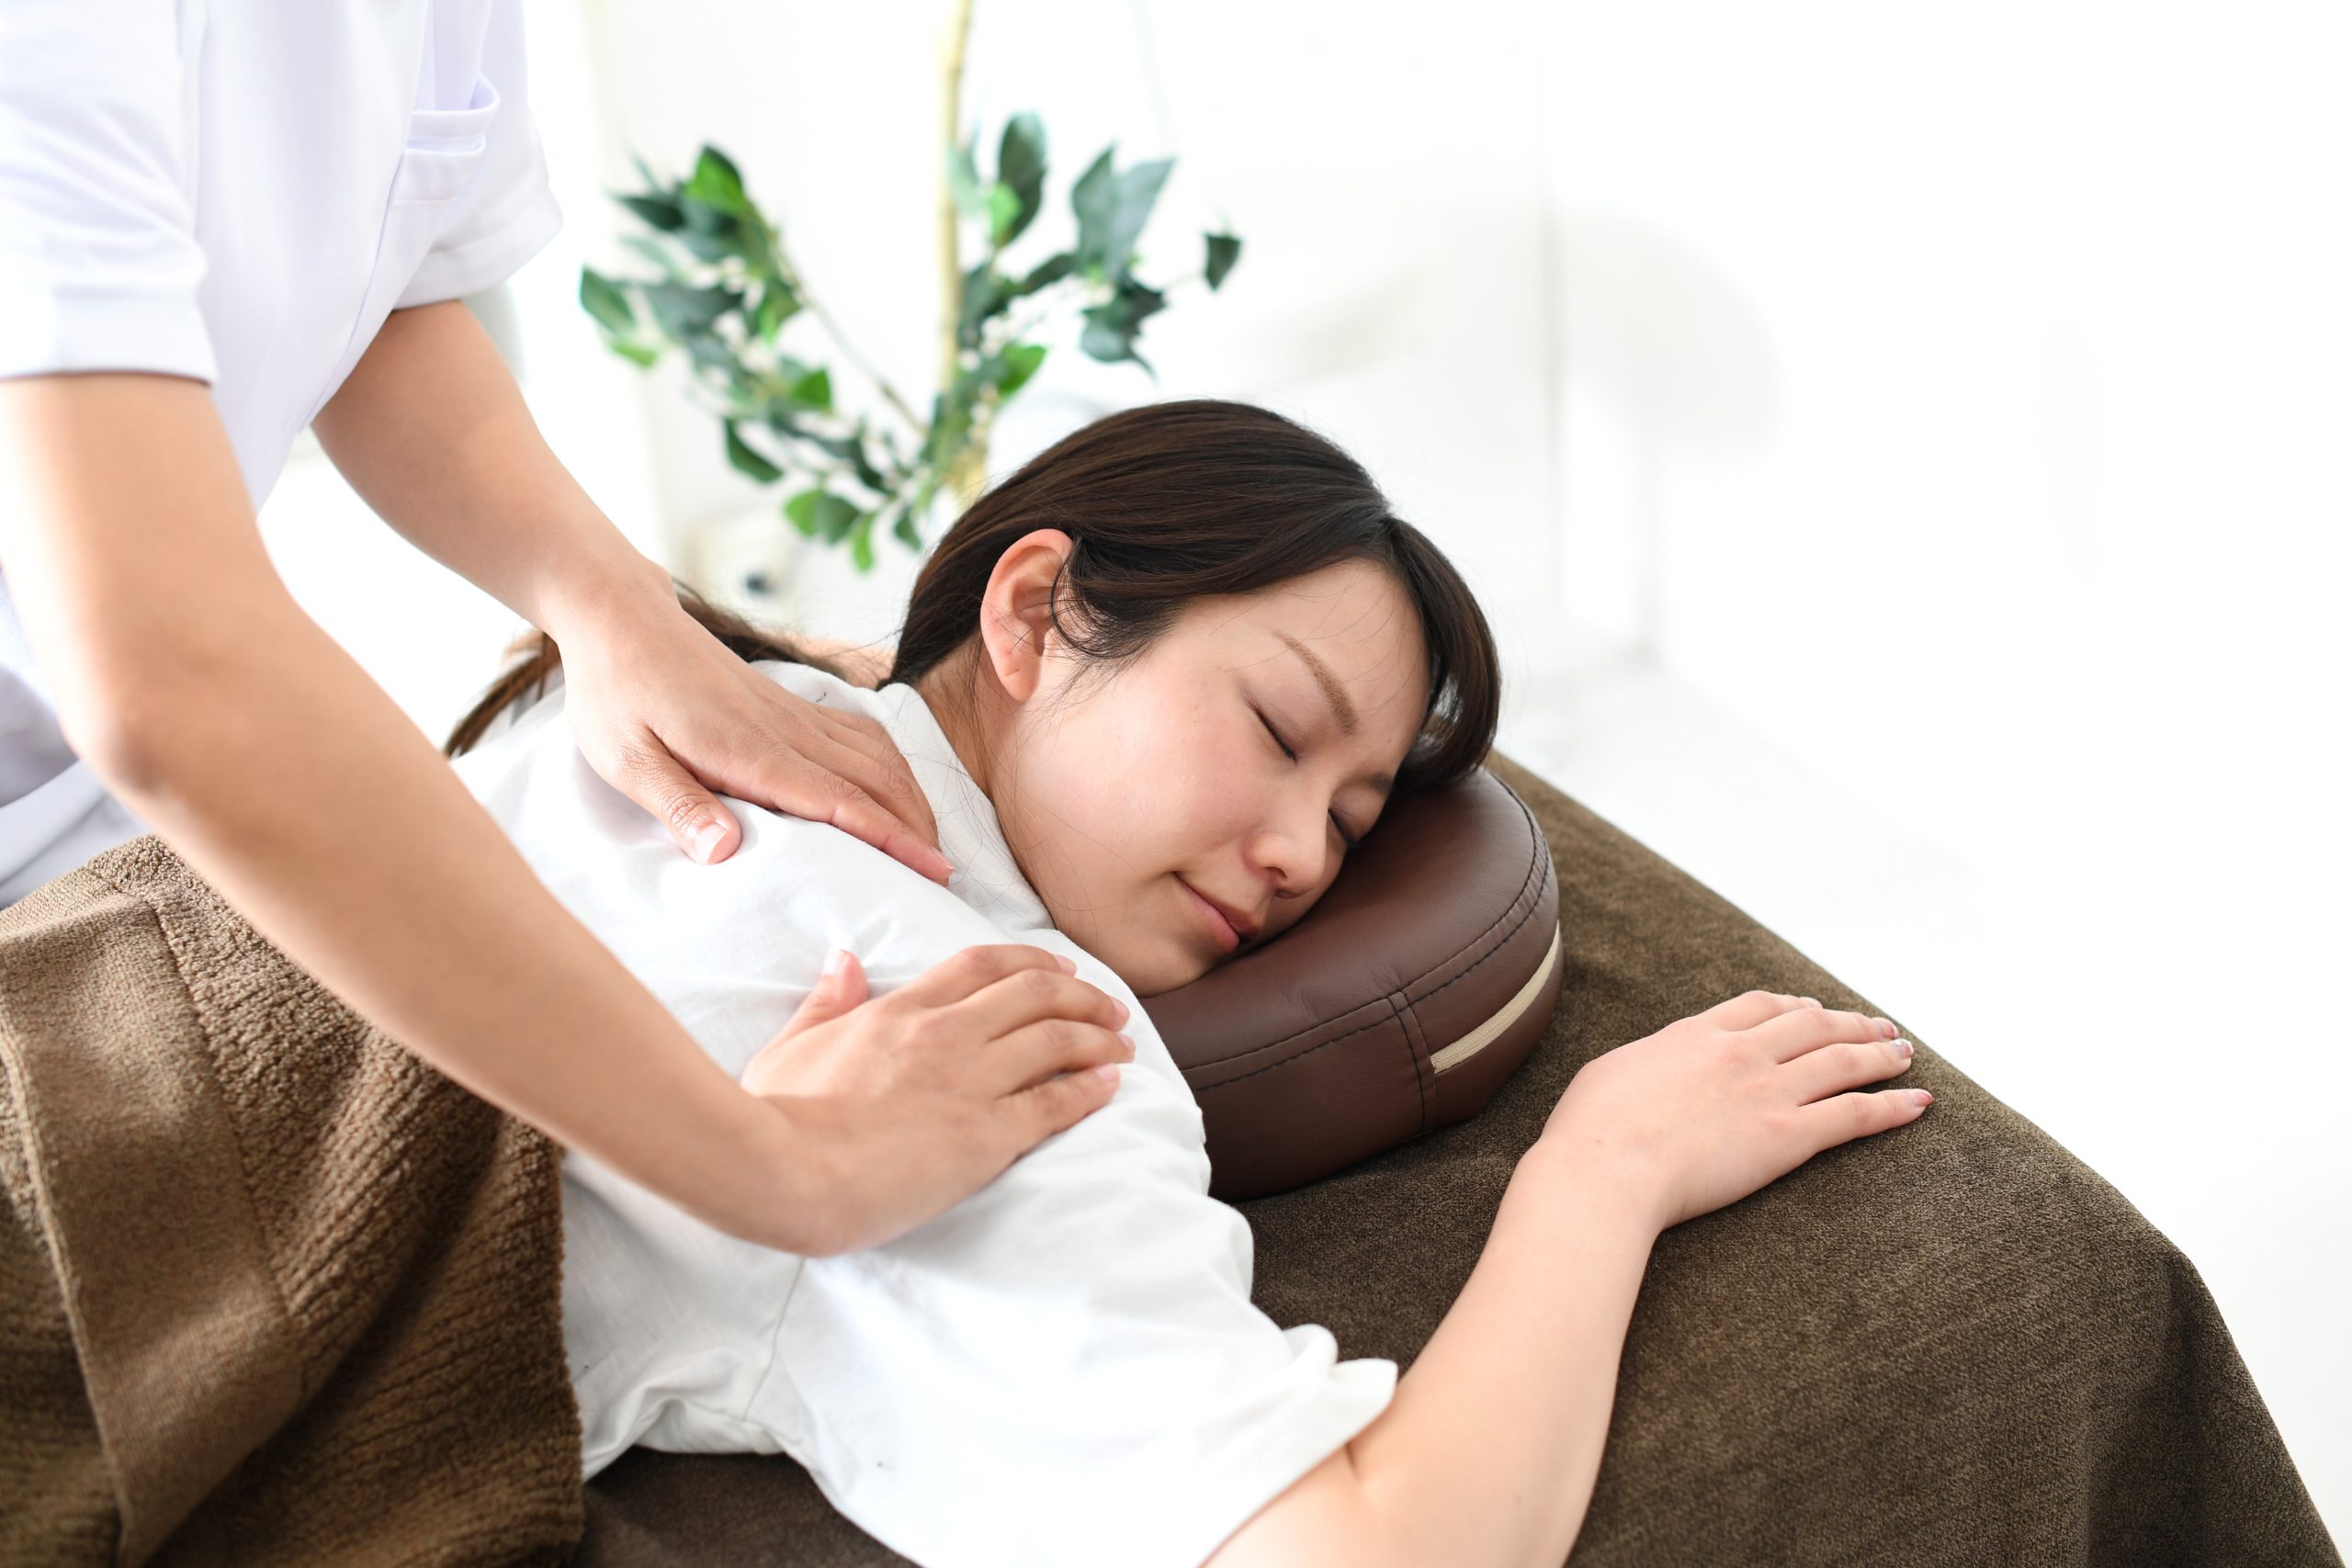 Massage Therapy for Improved Sleep and Stress Reduction